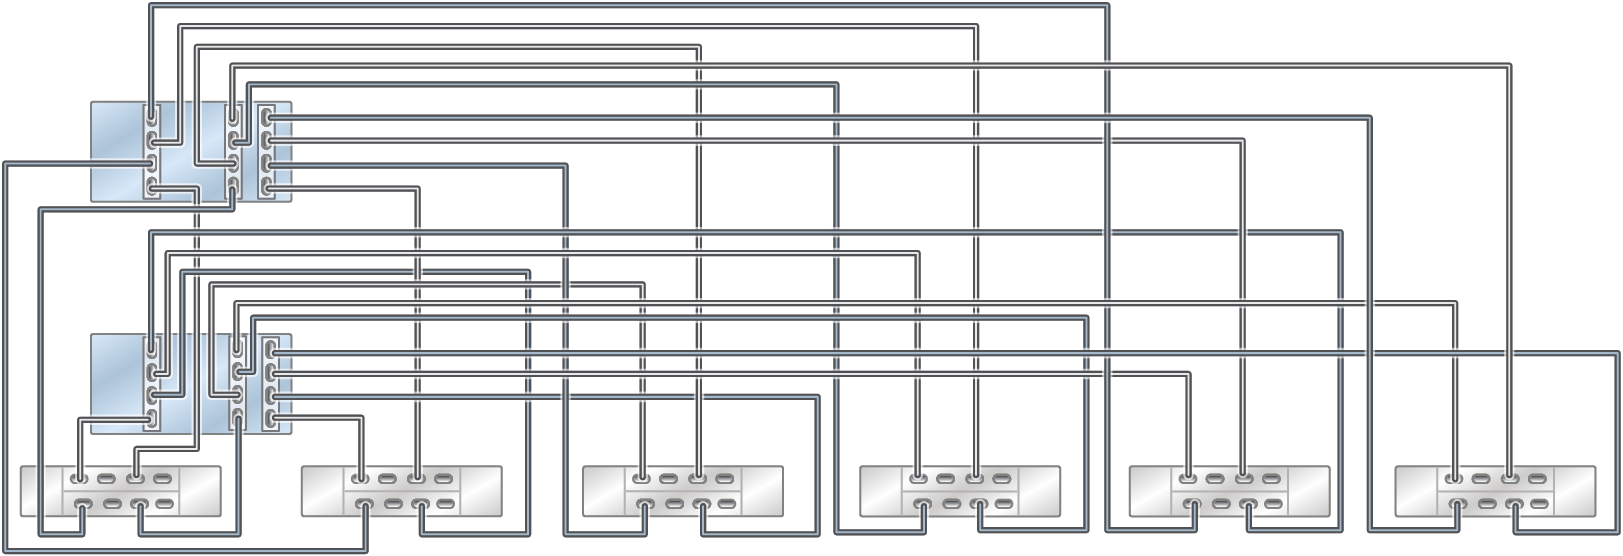 image:Clustered ZS5-4 controllers with three HBAs connected to six DE3-24                             disk shelves in six chains